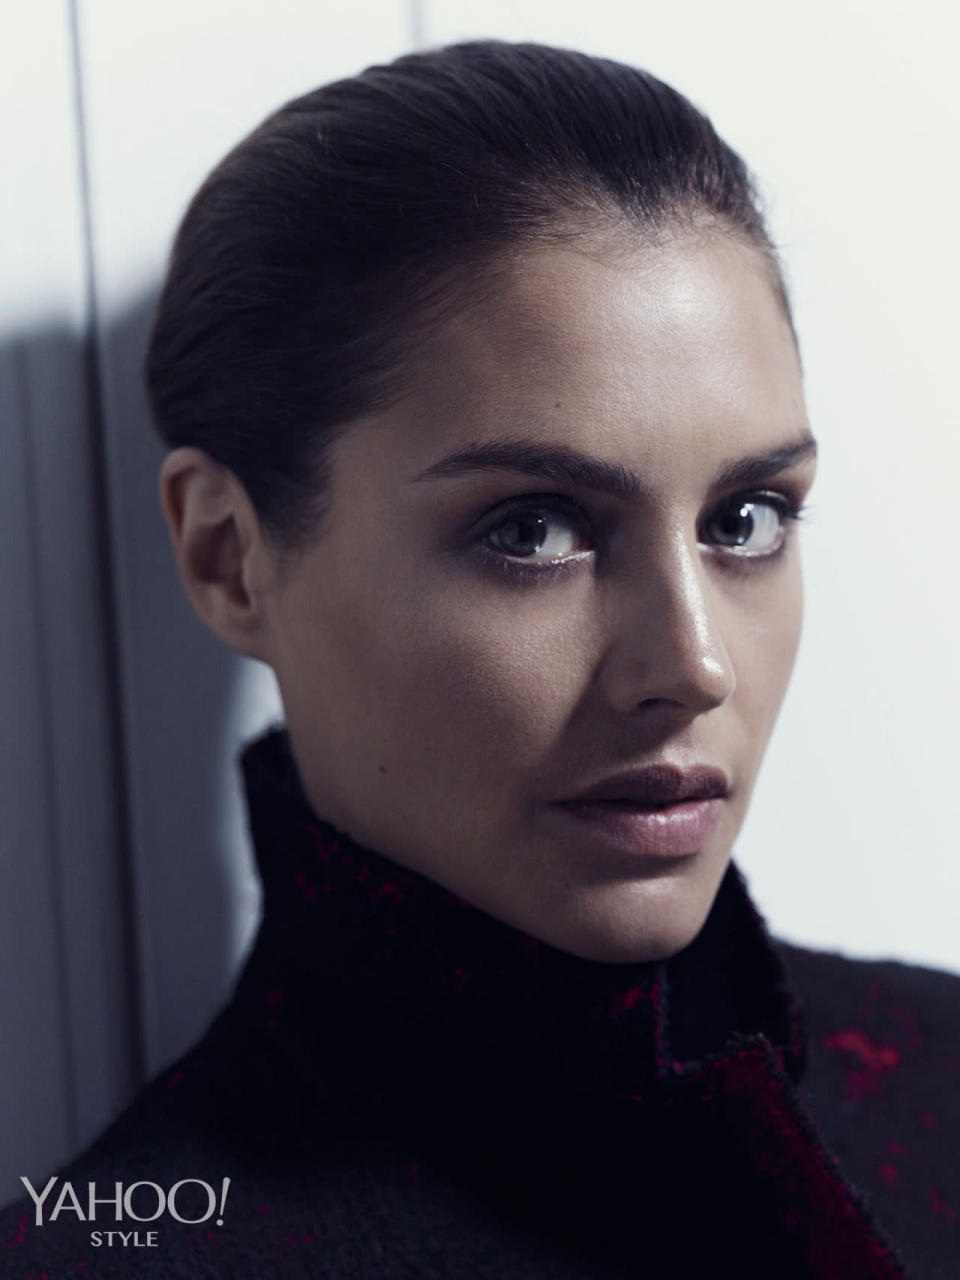 Hannah Ware is ready for fall in a Proenza Schouler turtleneck.